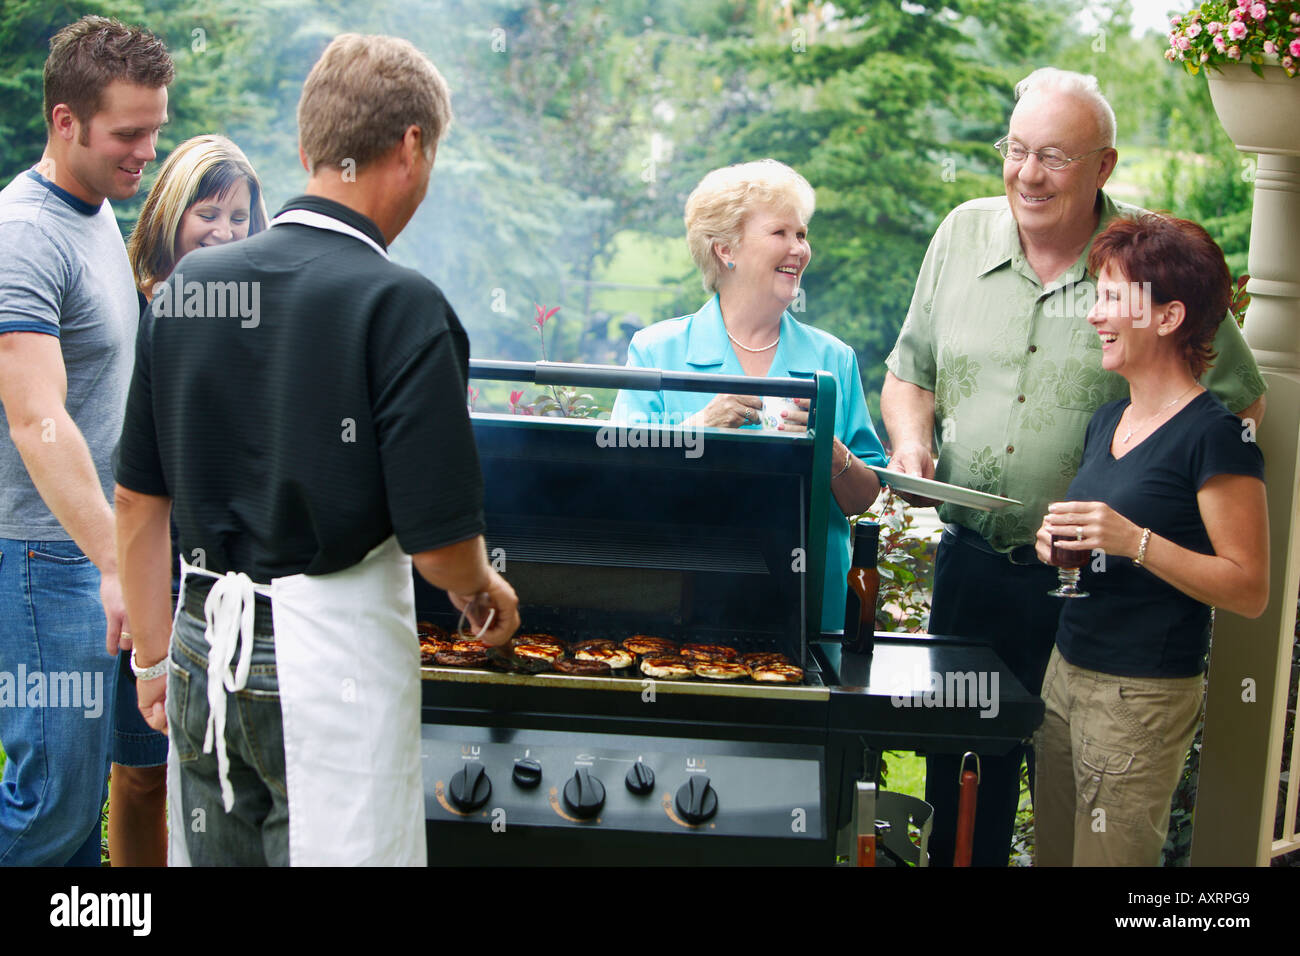 Man barbecuing burgers and talking with group of people Stock Photo